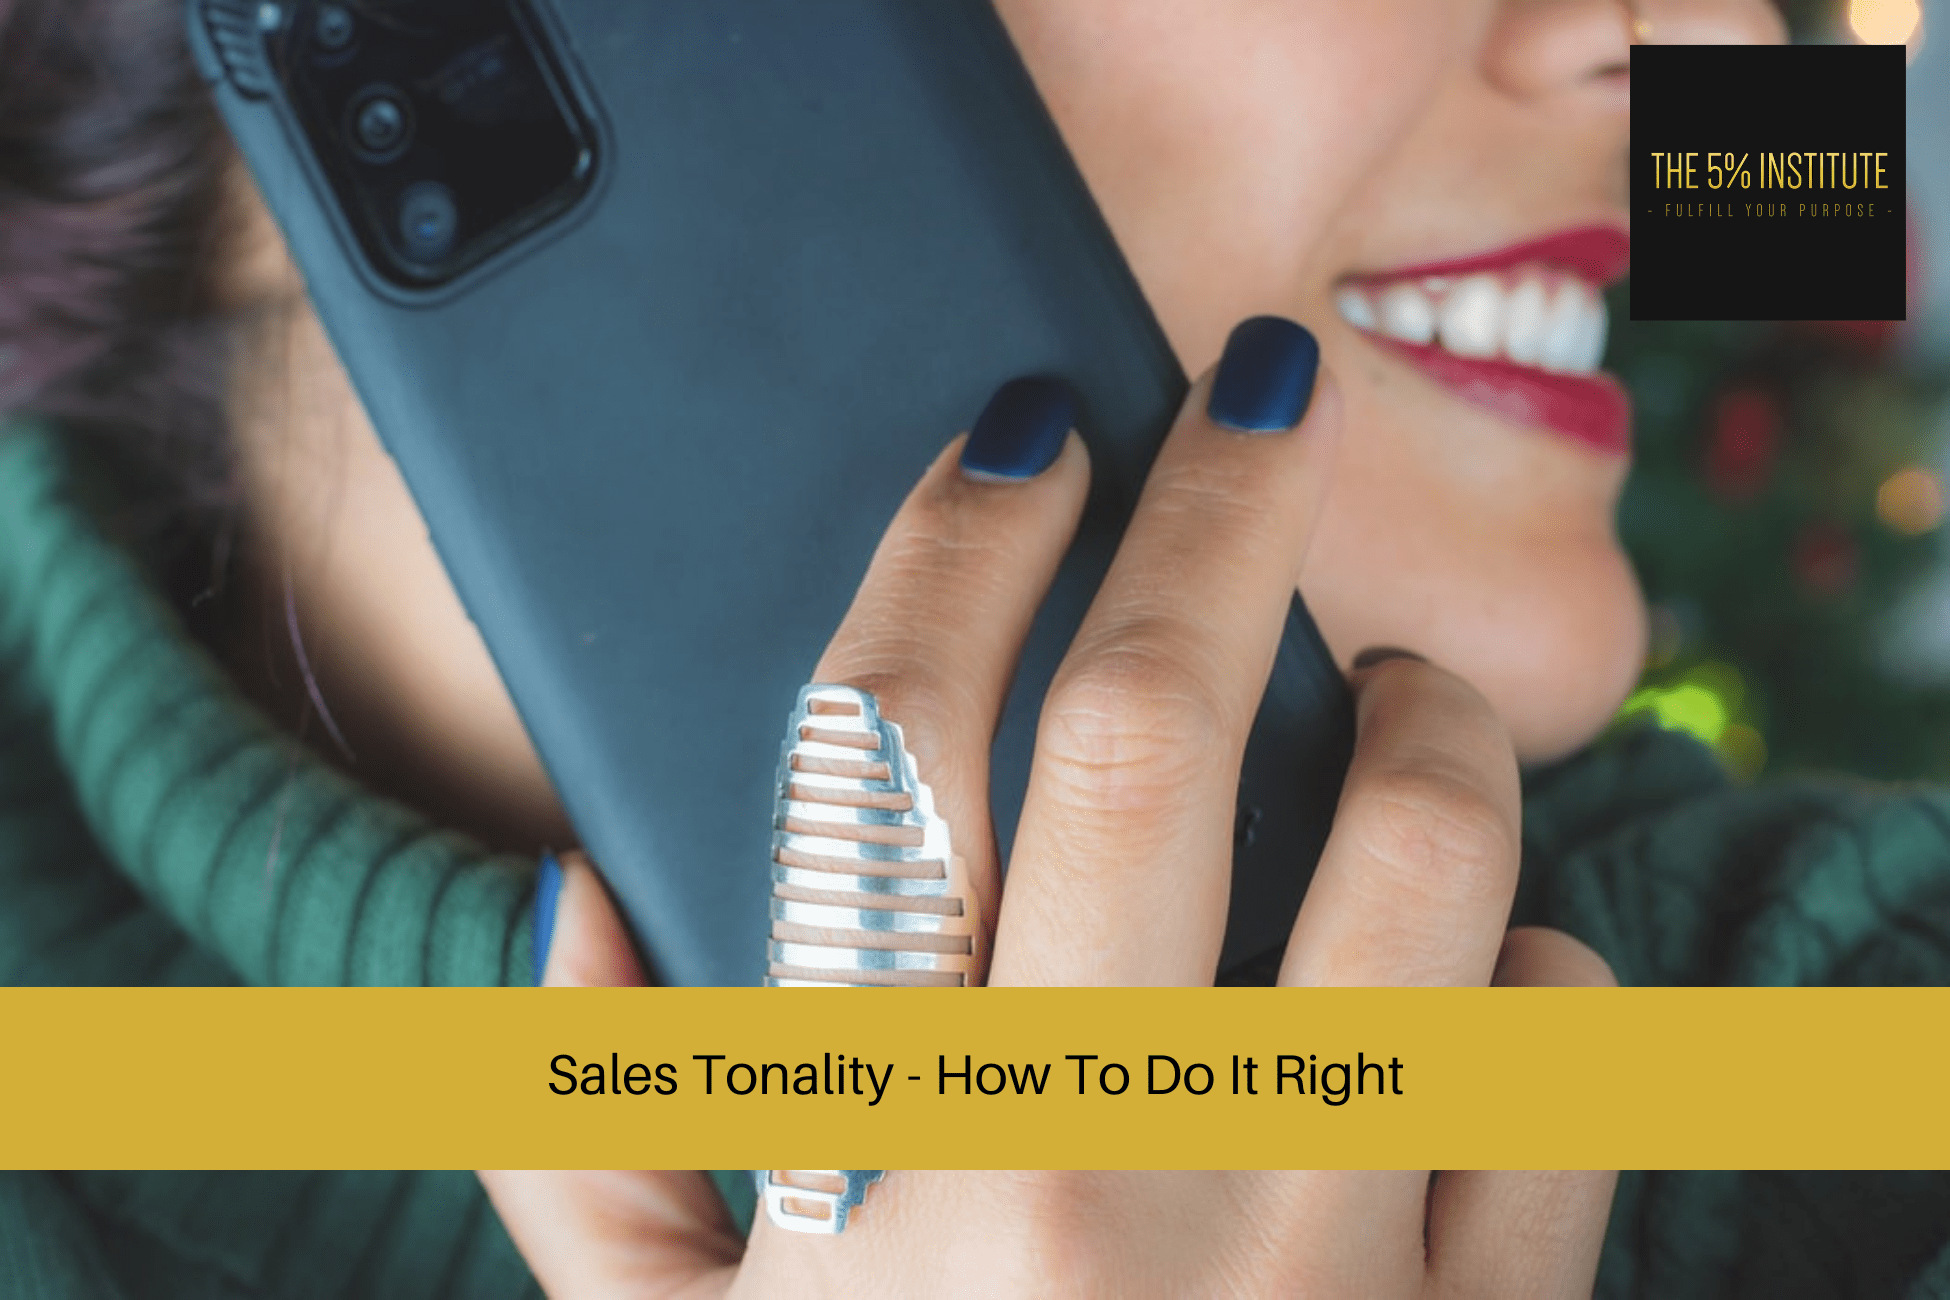 Sales Tonality - How To Do It Right